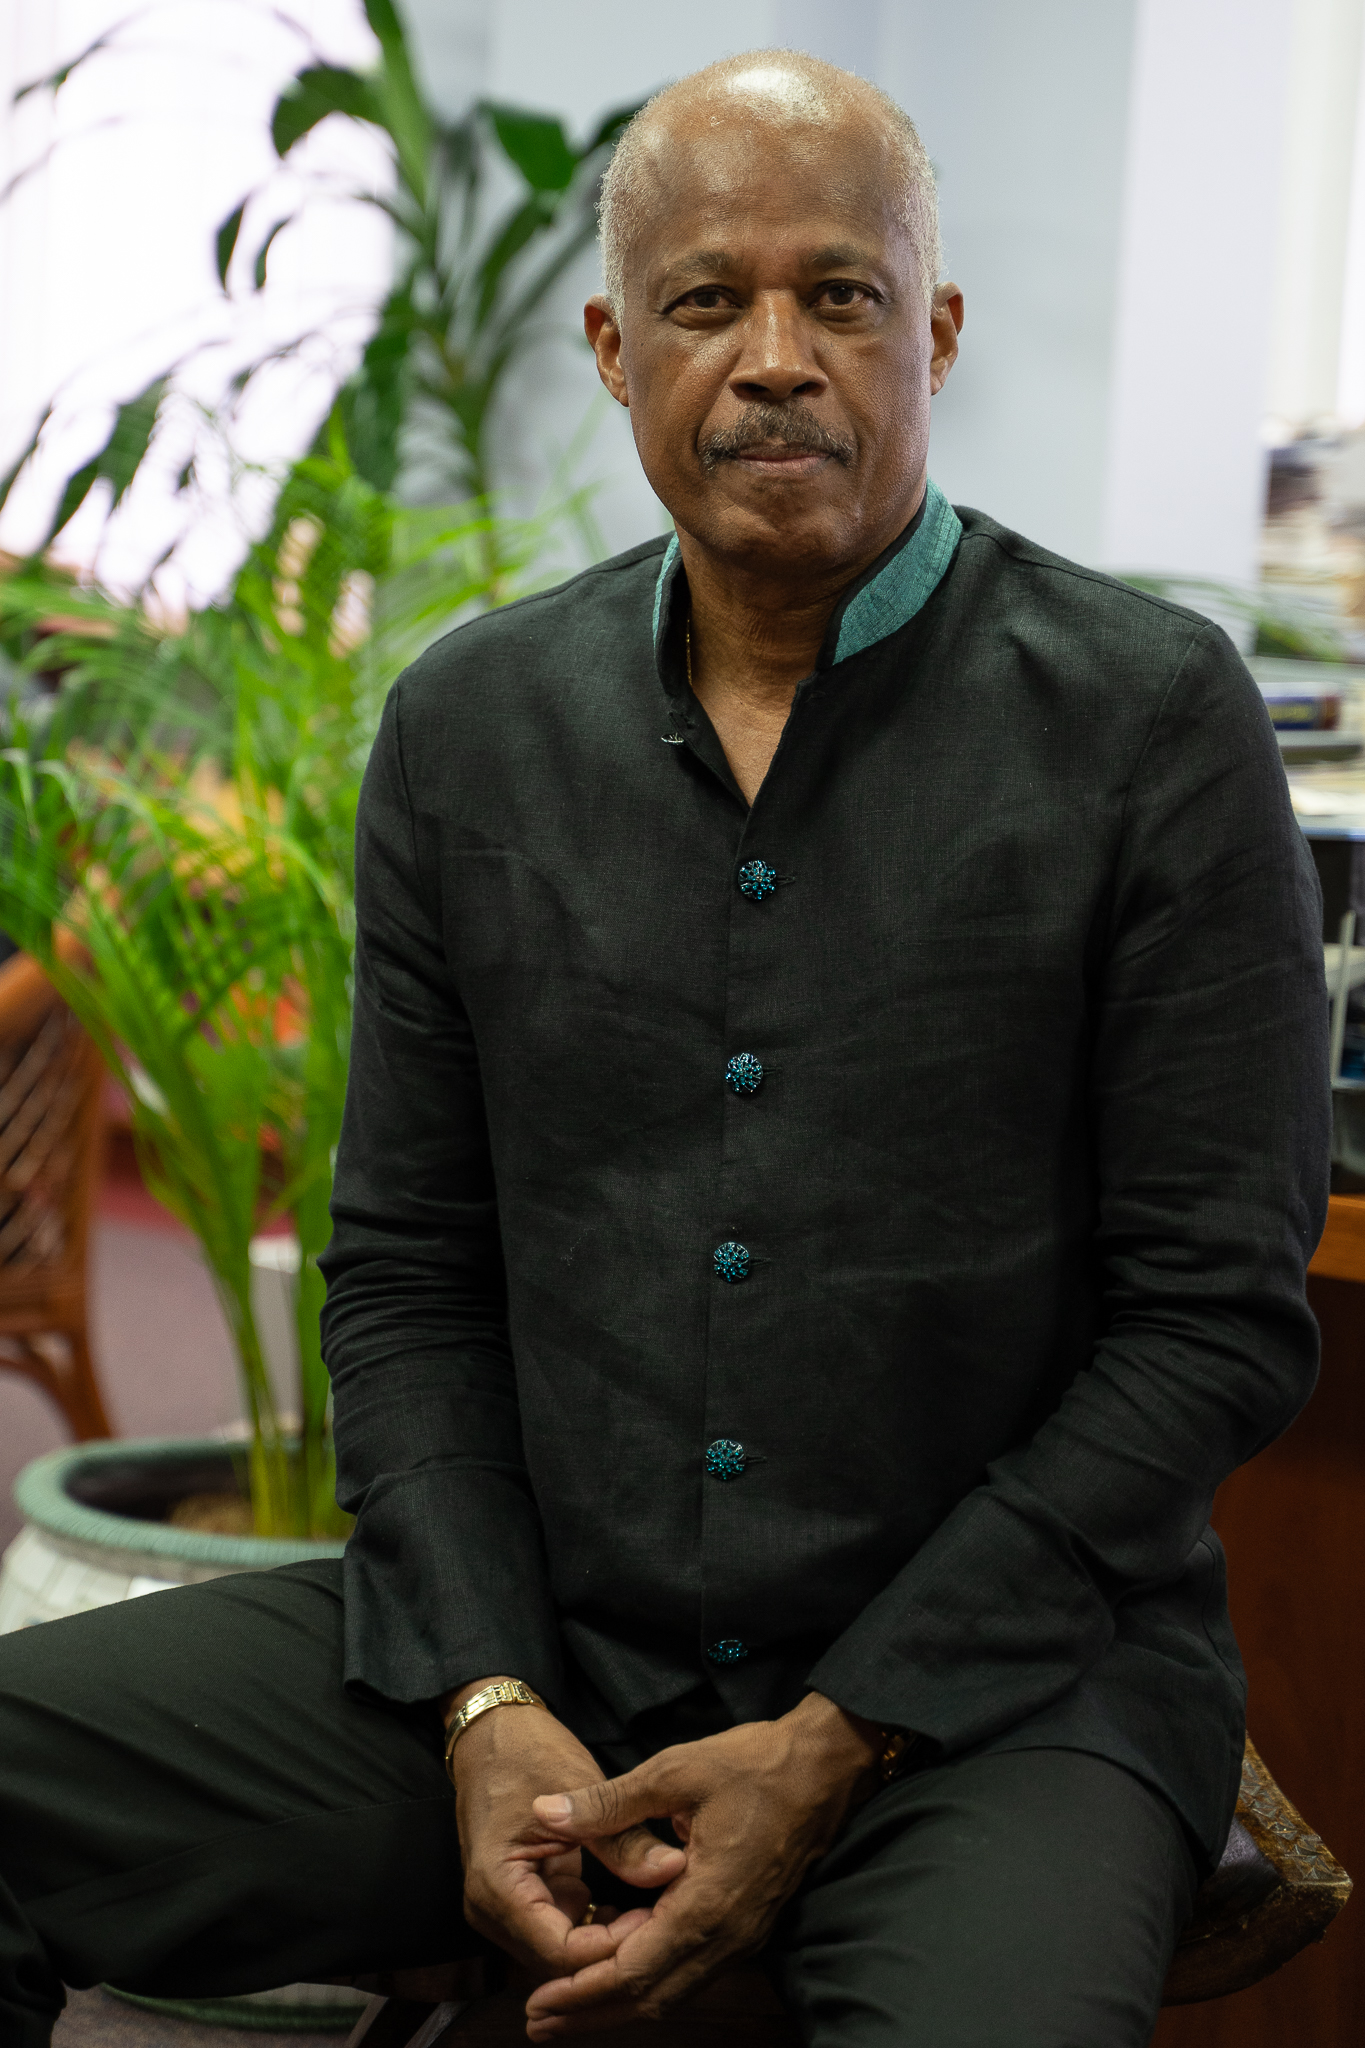 Vice-Chancellor of The University of the West Indies, Professor Sir Hilary Beckles